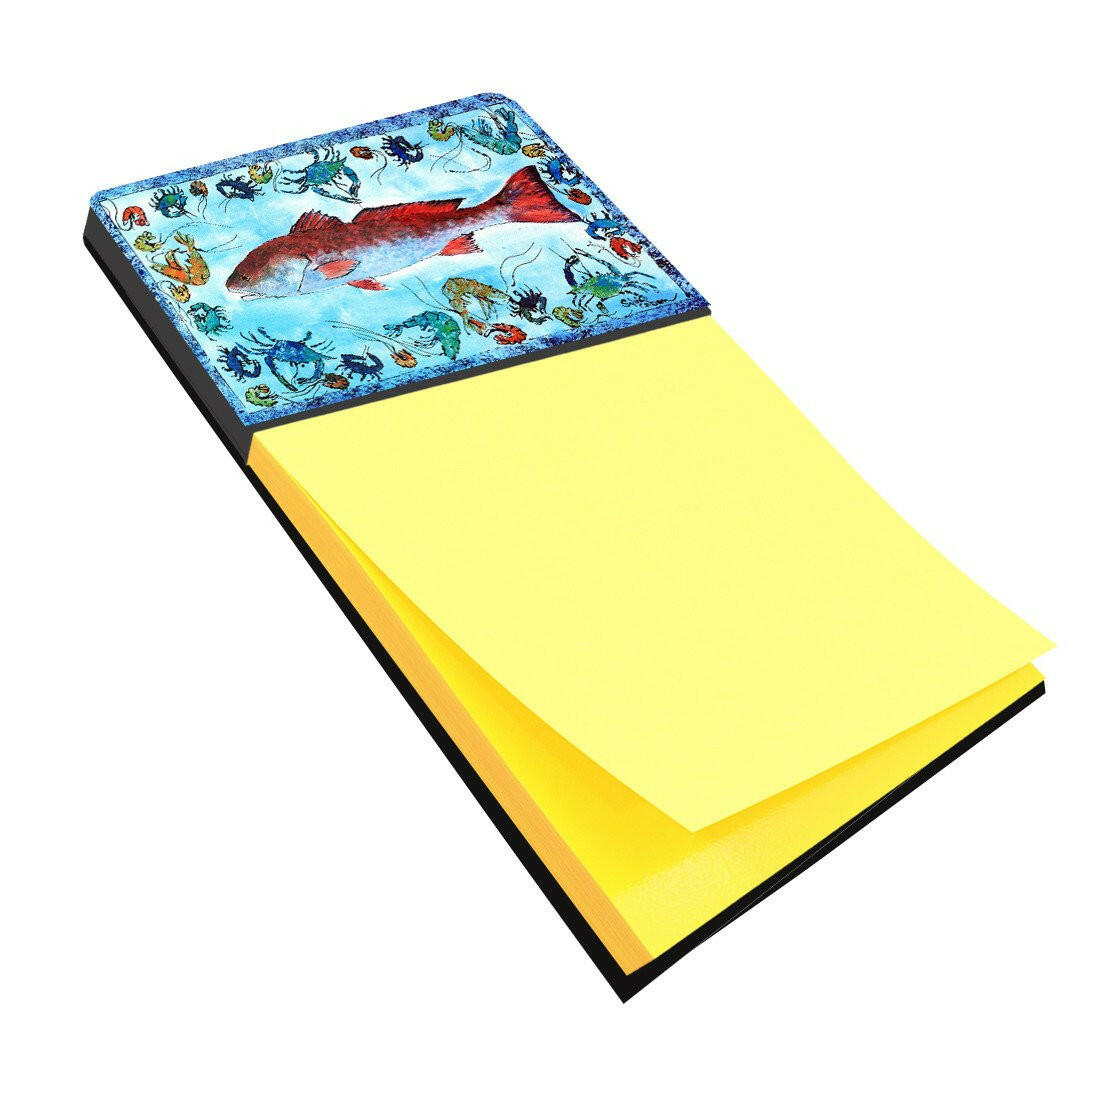 Red Fish Refiillable Sticky Note Holder or Postit Note Dispenser 8087SN by Caroline's Treasures